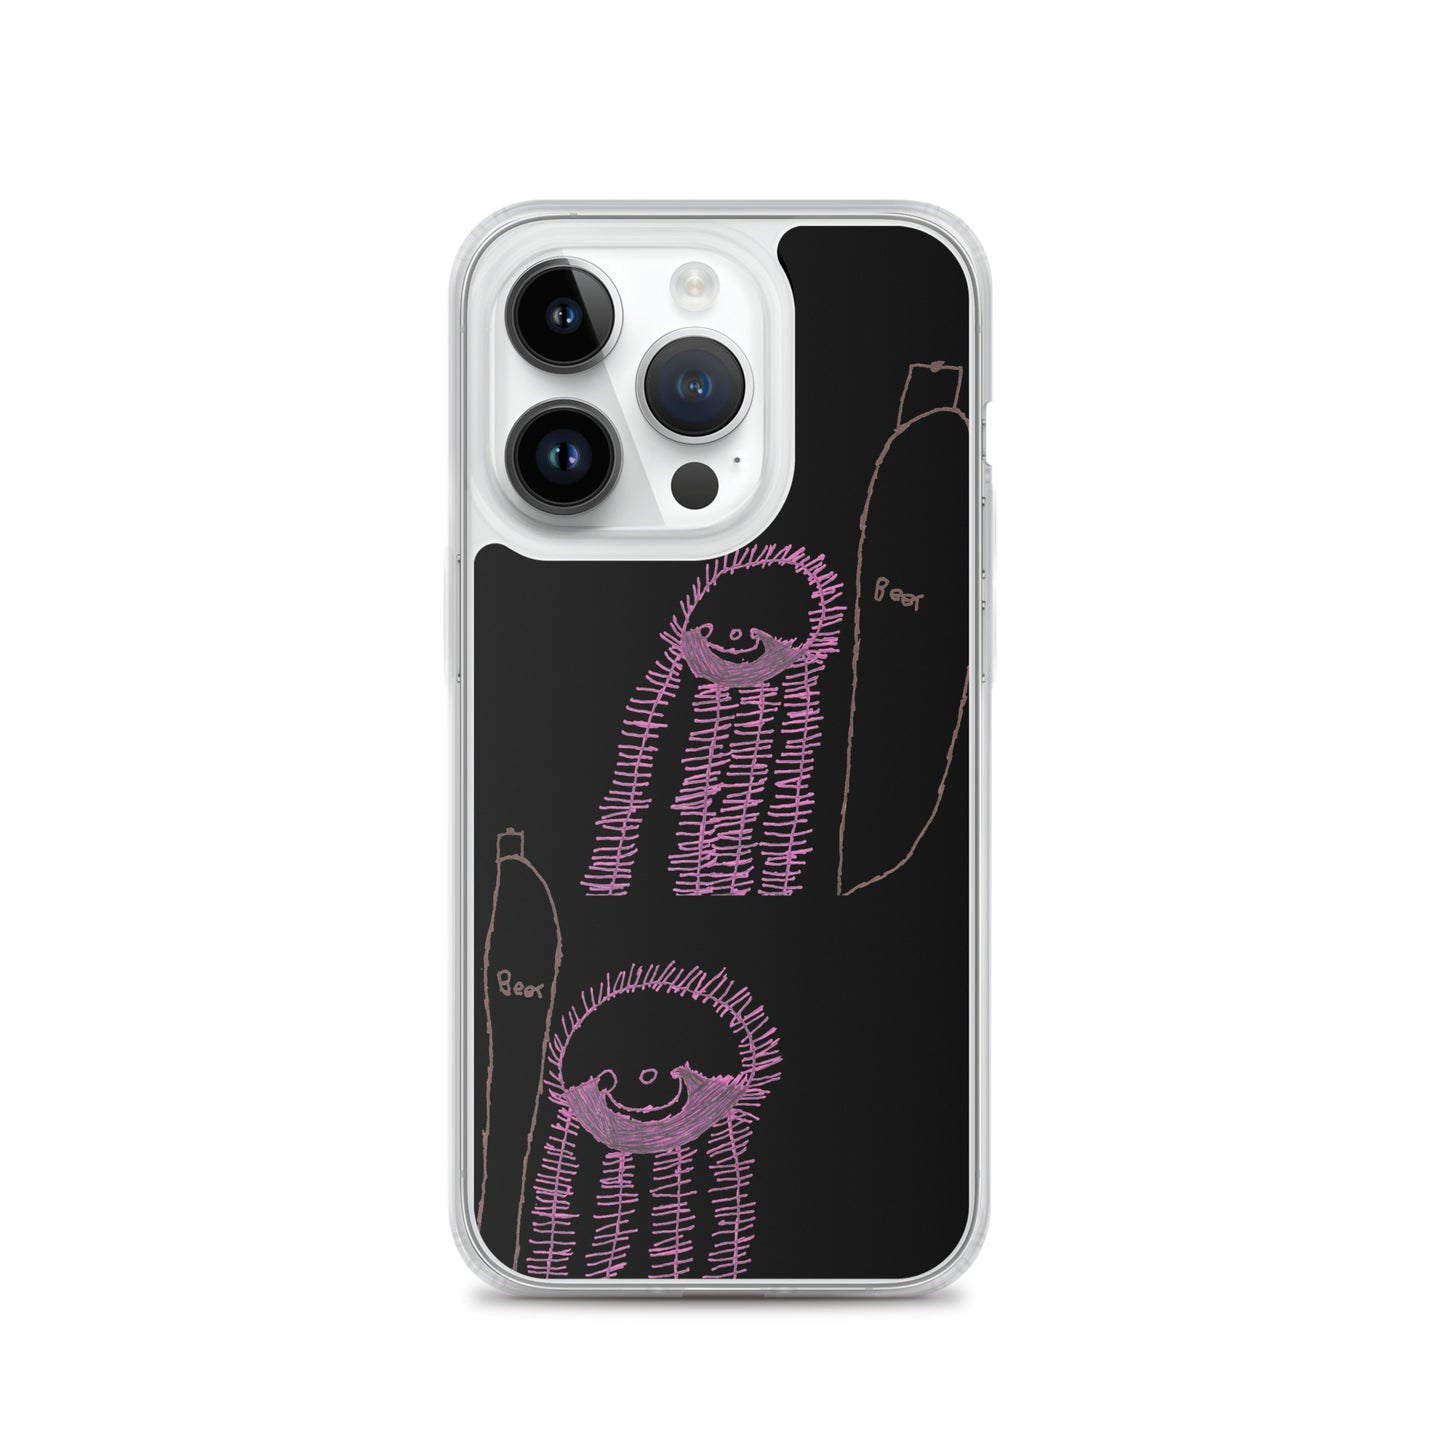 iPhone Case - "Drinking Beer With Dad"